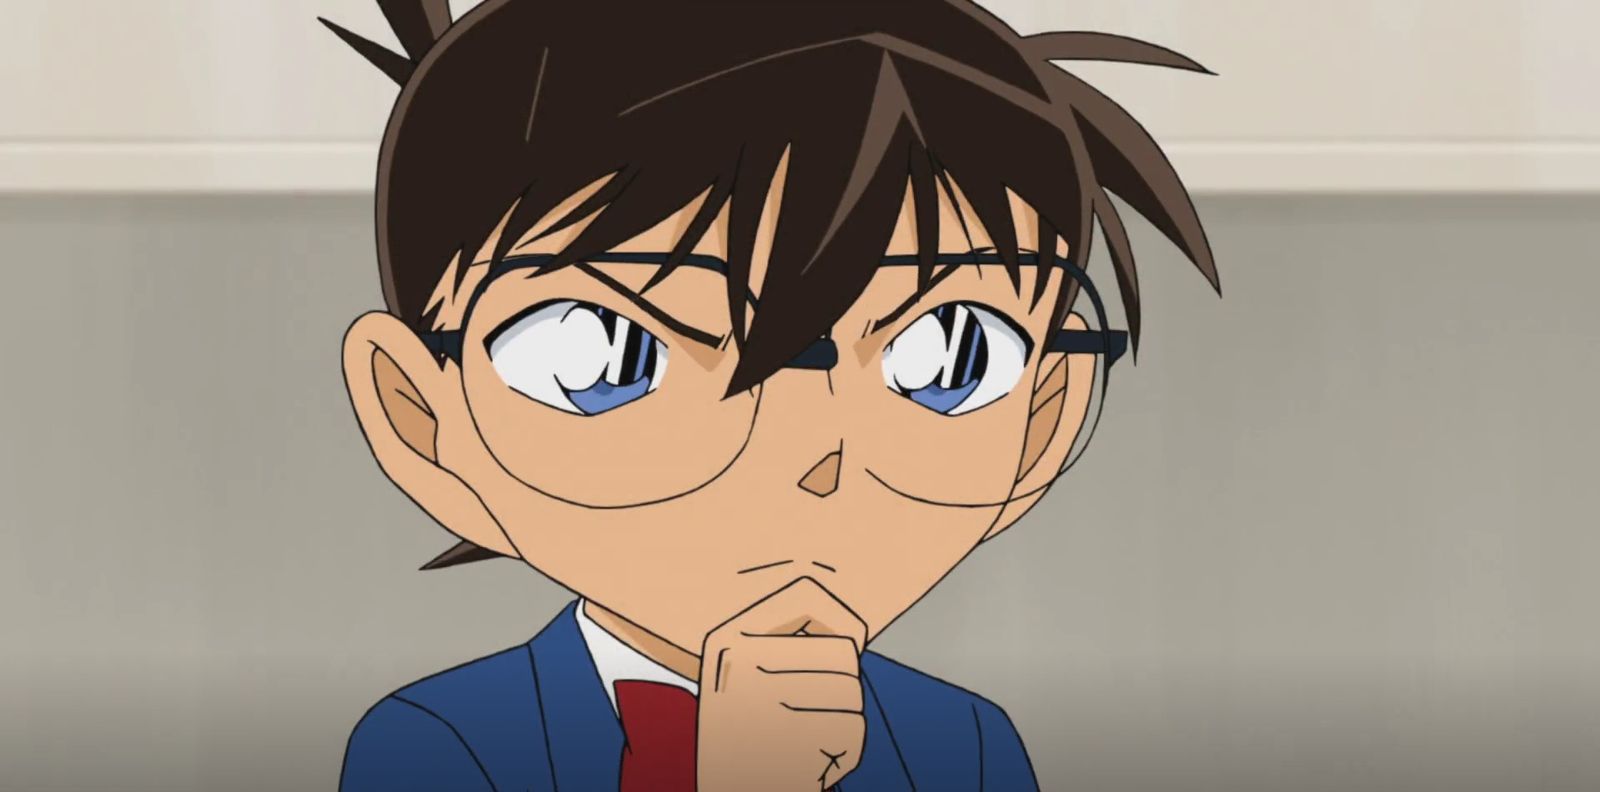 Detective Conan Case Closed Overview and Episode 1066 Highlights Conan